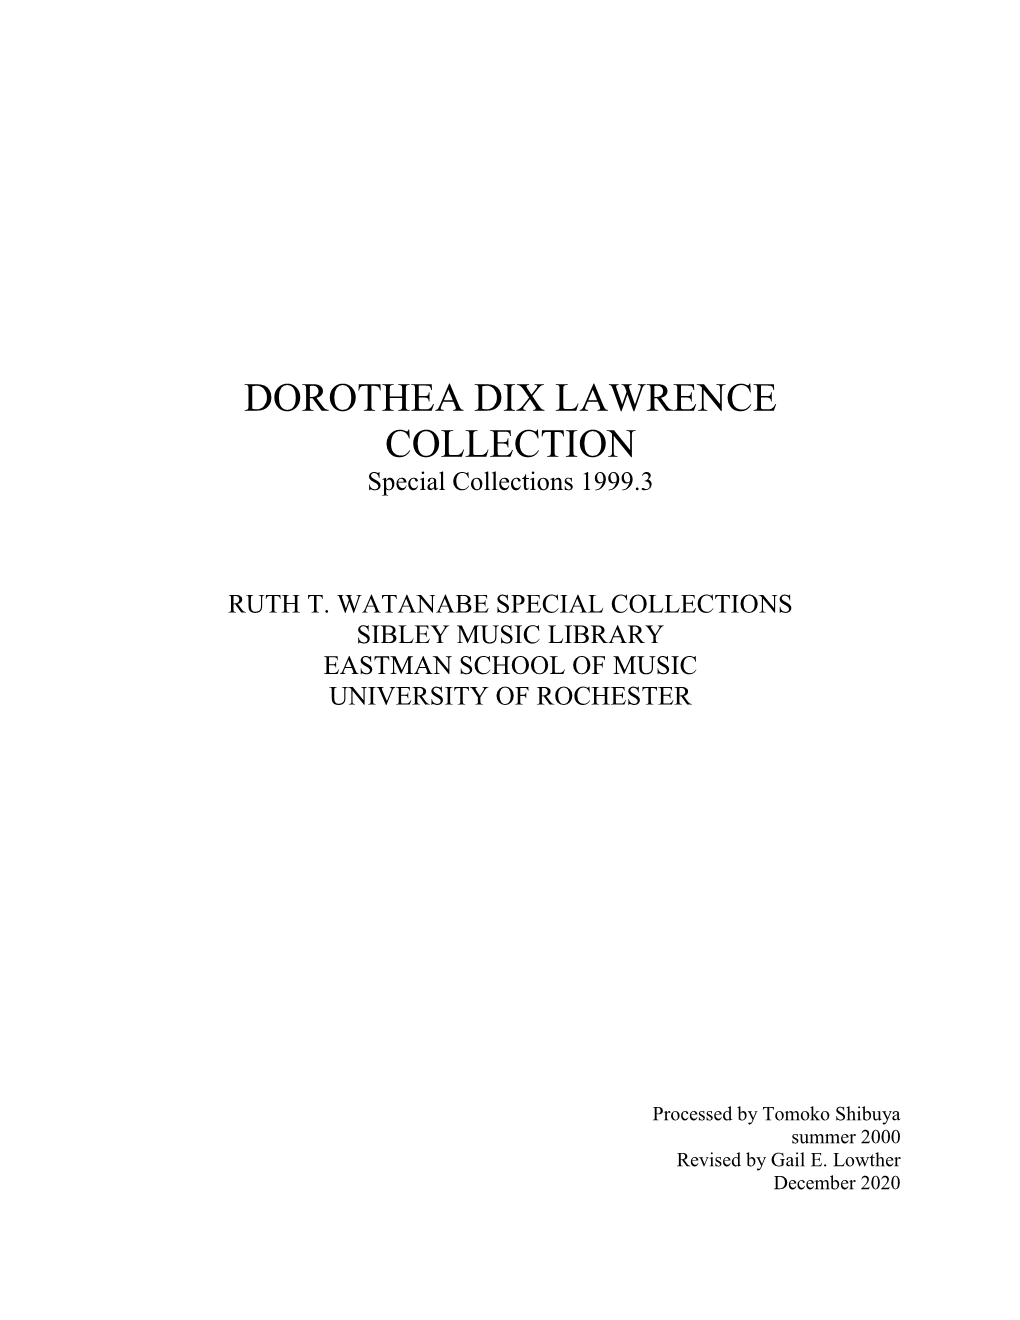 DOROTHEA DIX LAWRENCE COLLECTION Special Collections 1999.3